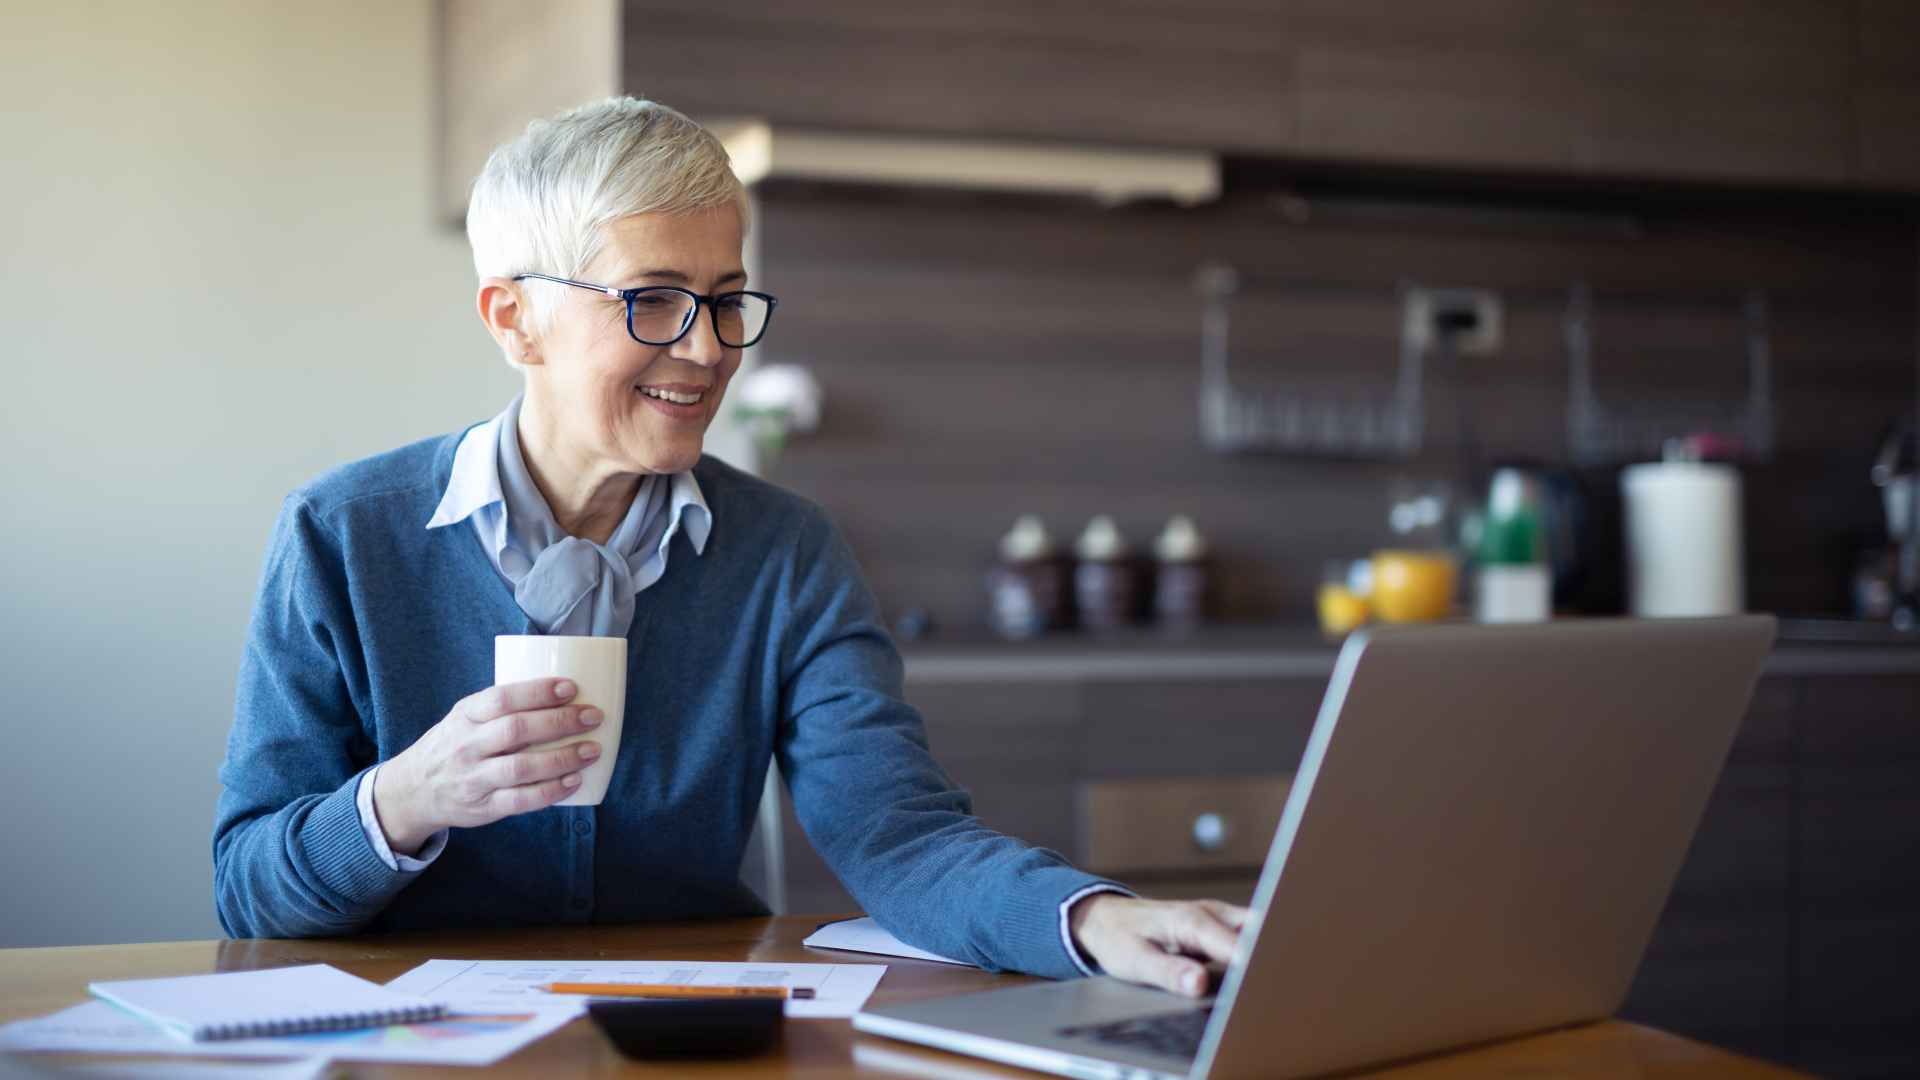 6 ways boomers can make an extra $10,000 a year